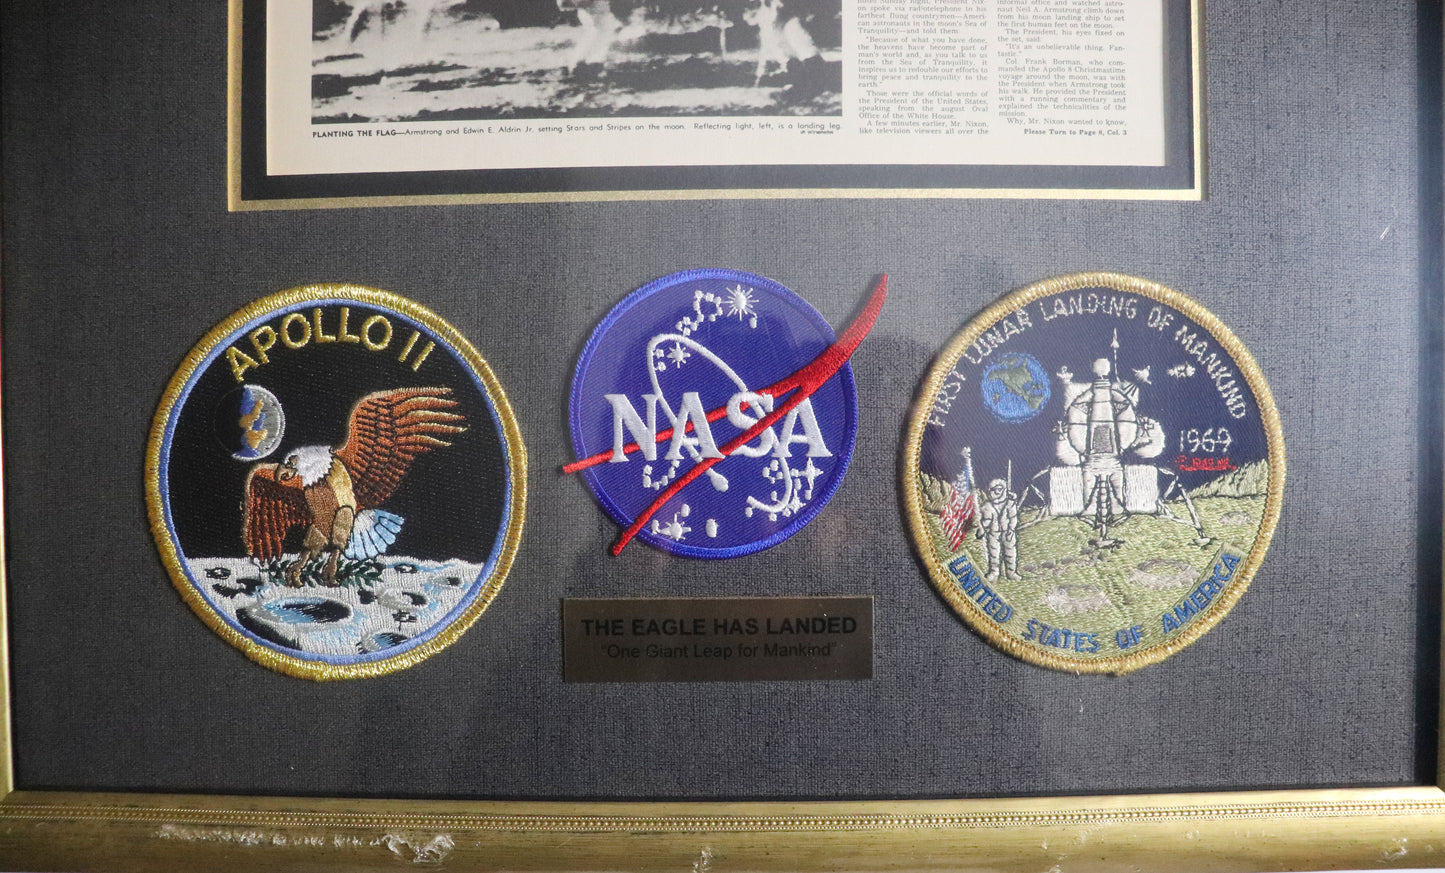 “The Eagle Has Landed” Apollo 11 Moon Landing Tribute, Framed, 24” H X 17” W